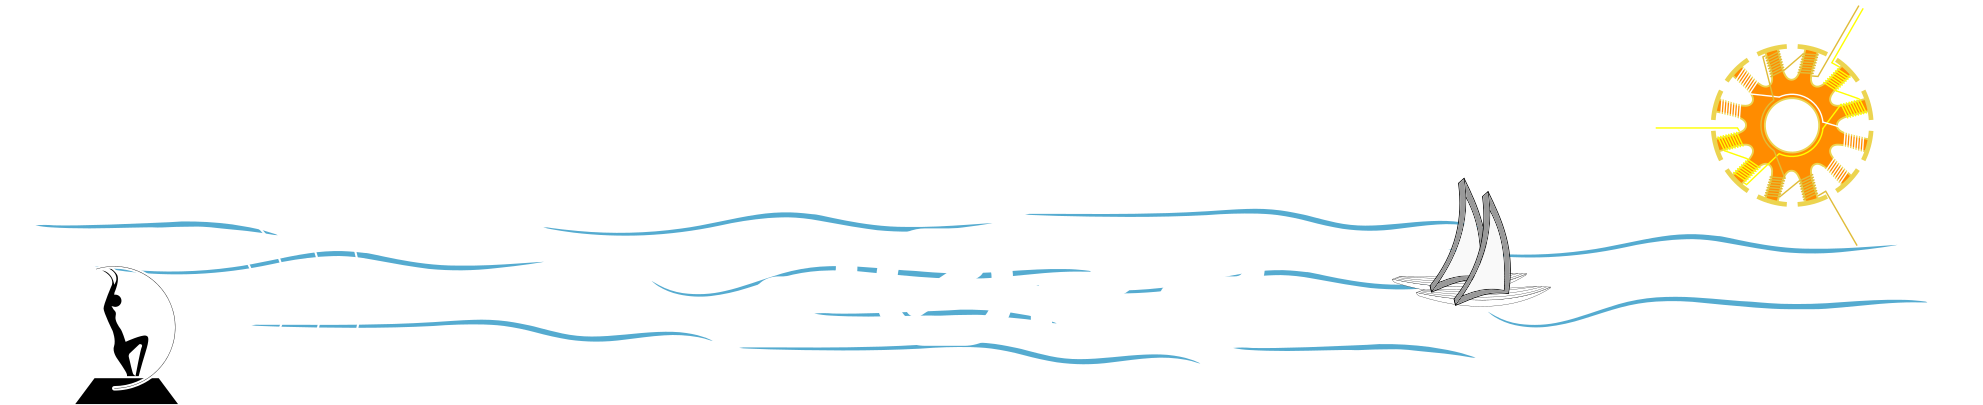 2022 Workshop on Communication Networks and Power Systems home